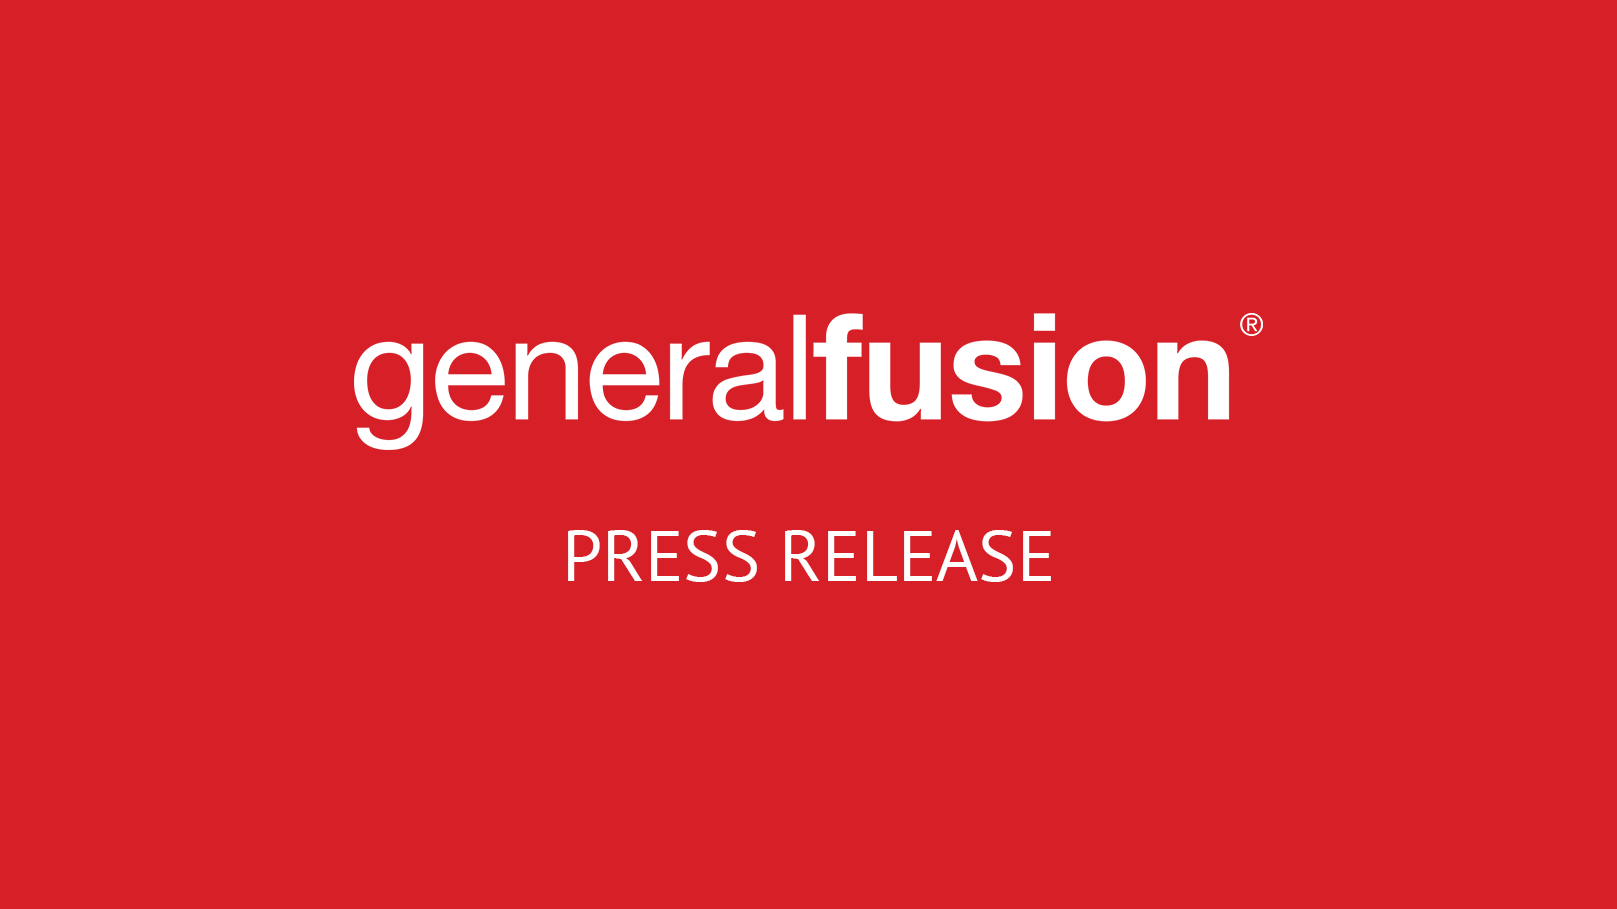 General Fusion broadens global government support with U.S. Department of Energy award